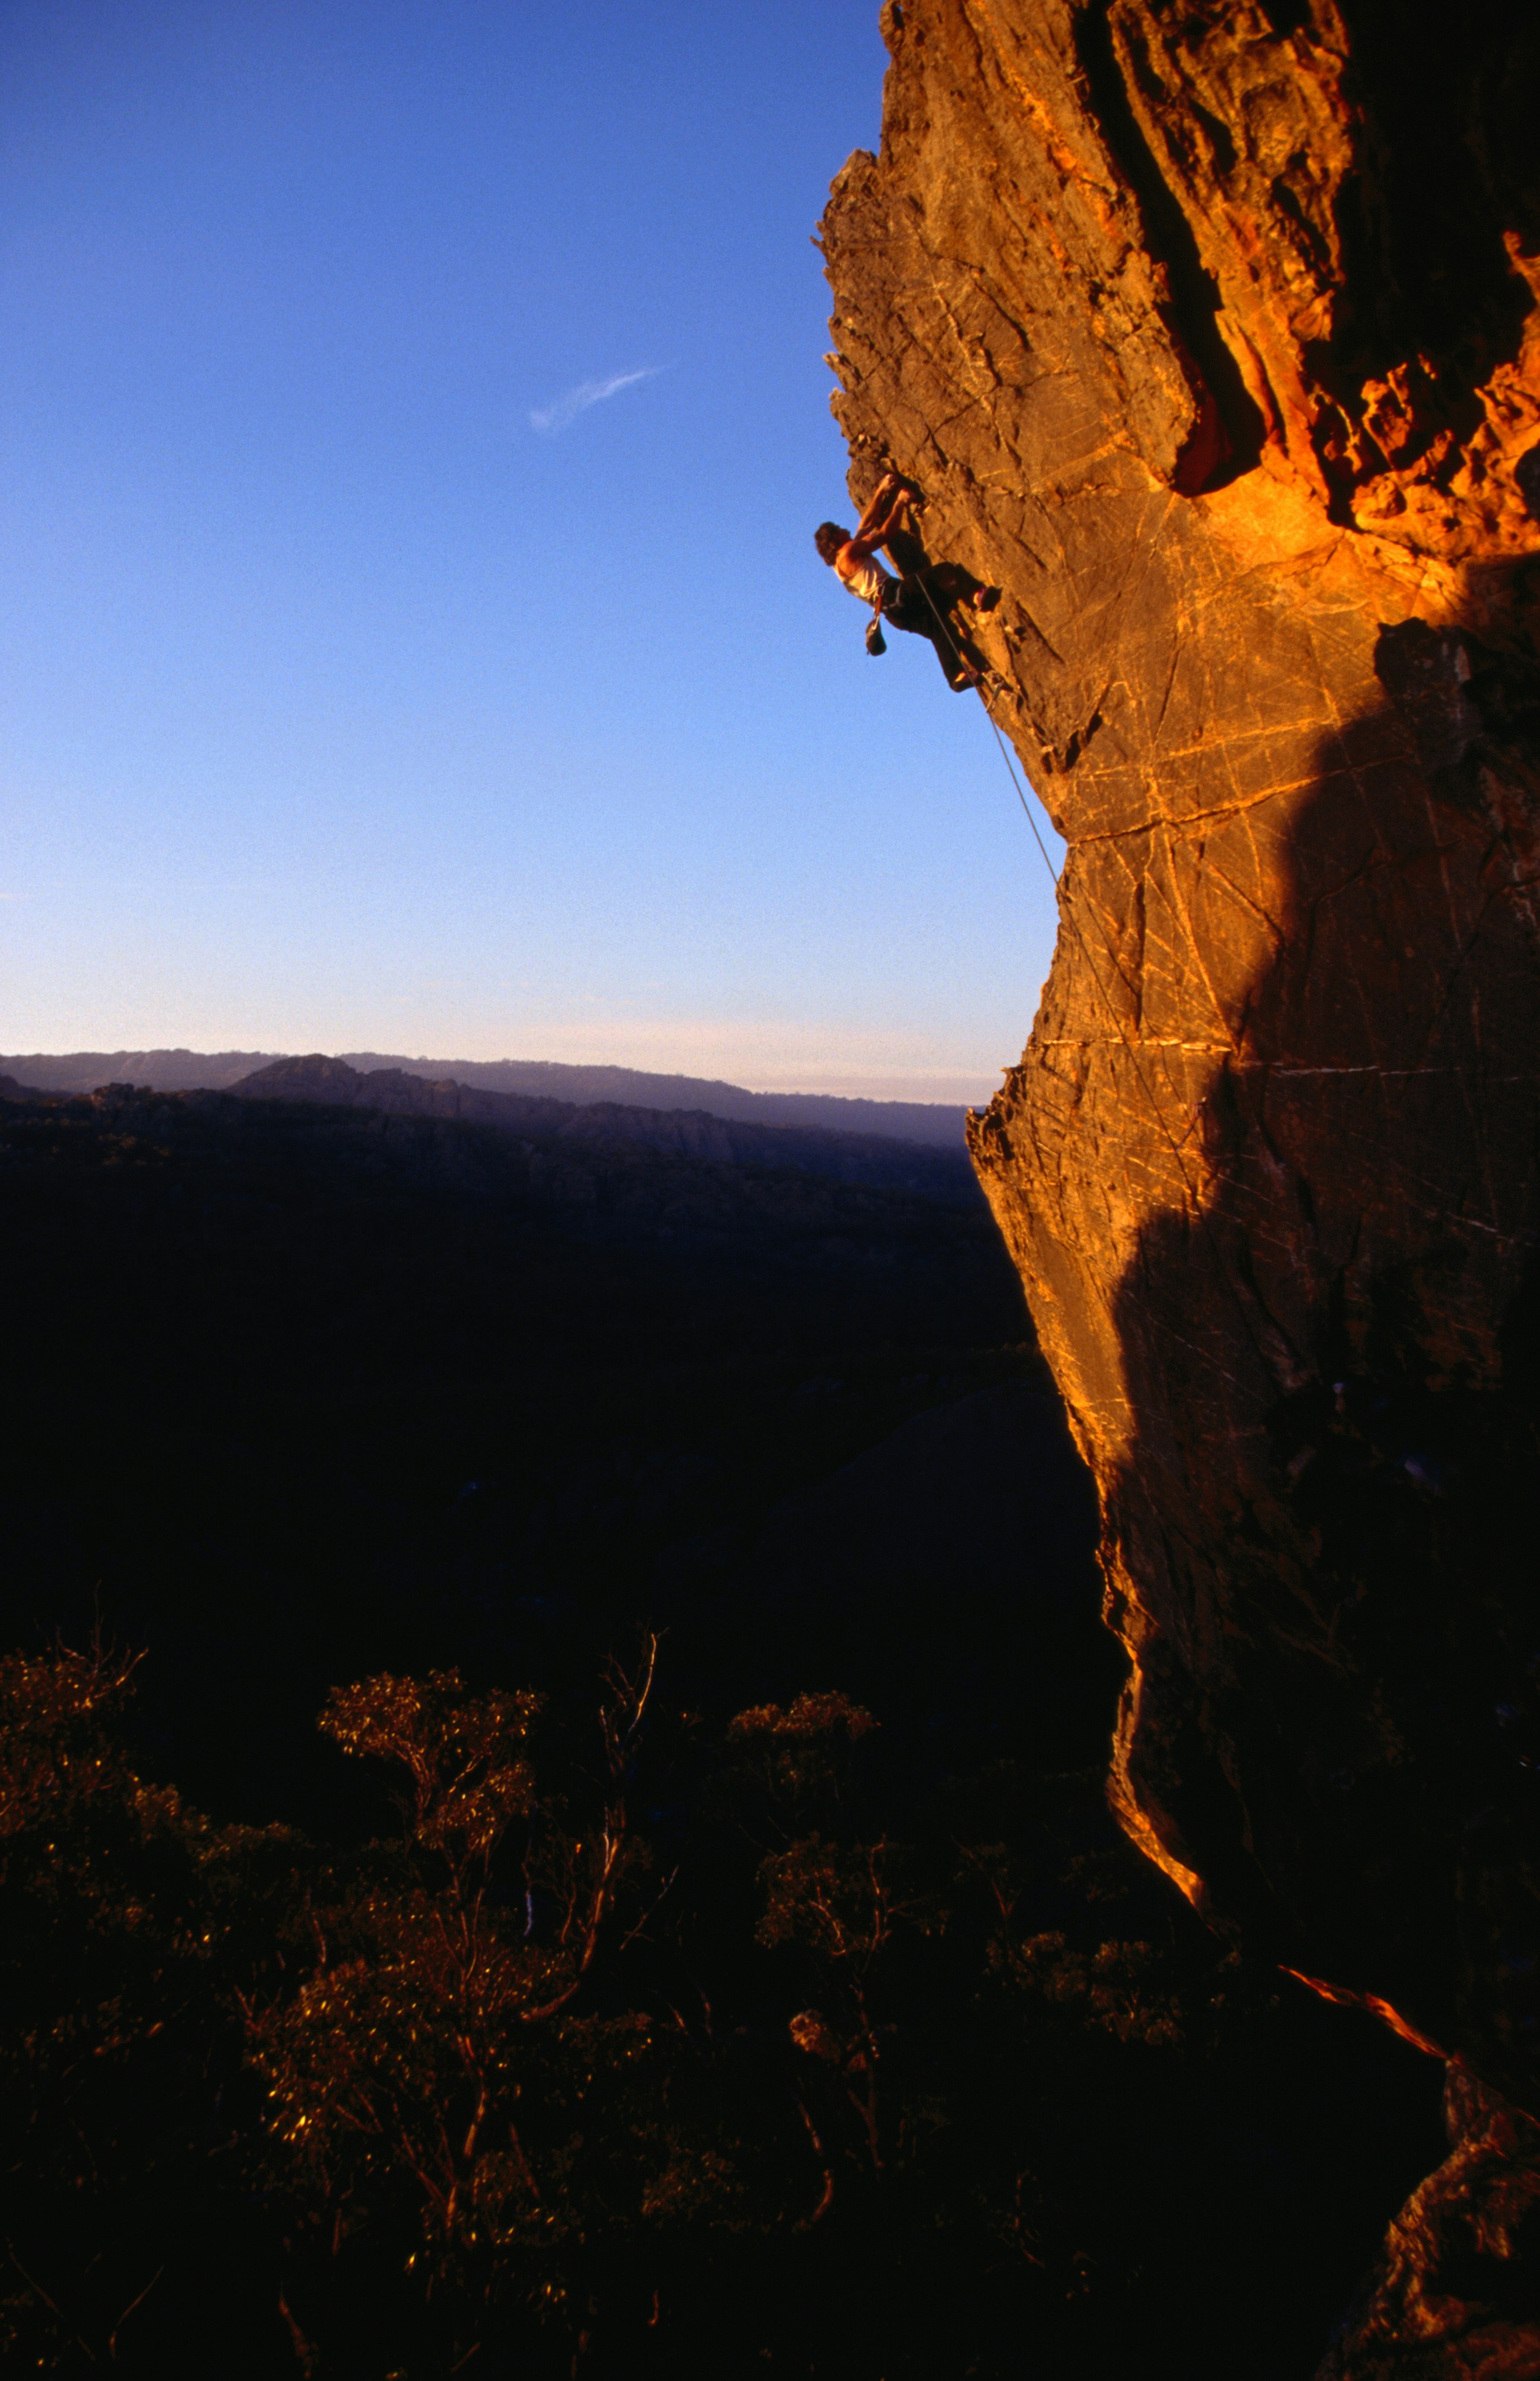 A rock climber clings to an overhanging slab of cliff face that is lit in the golden light at sunset; below him is shaded rock and behind him a sheer drop into forests far below. Above is a blue sky.